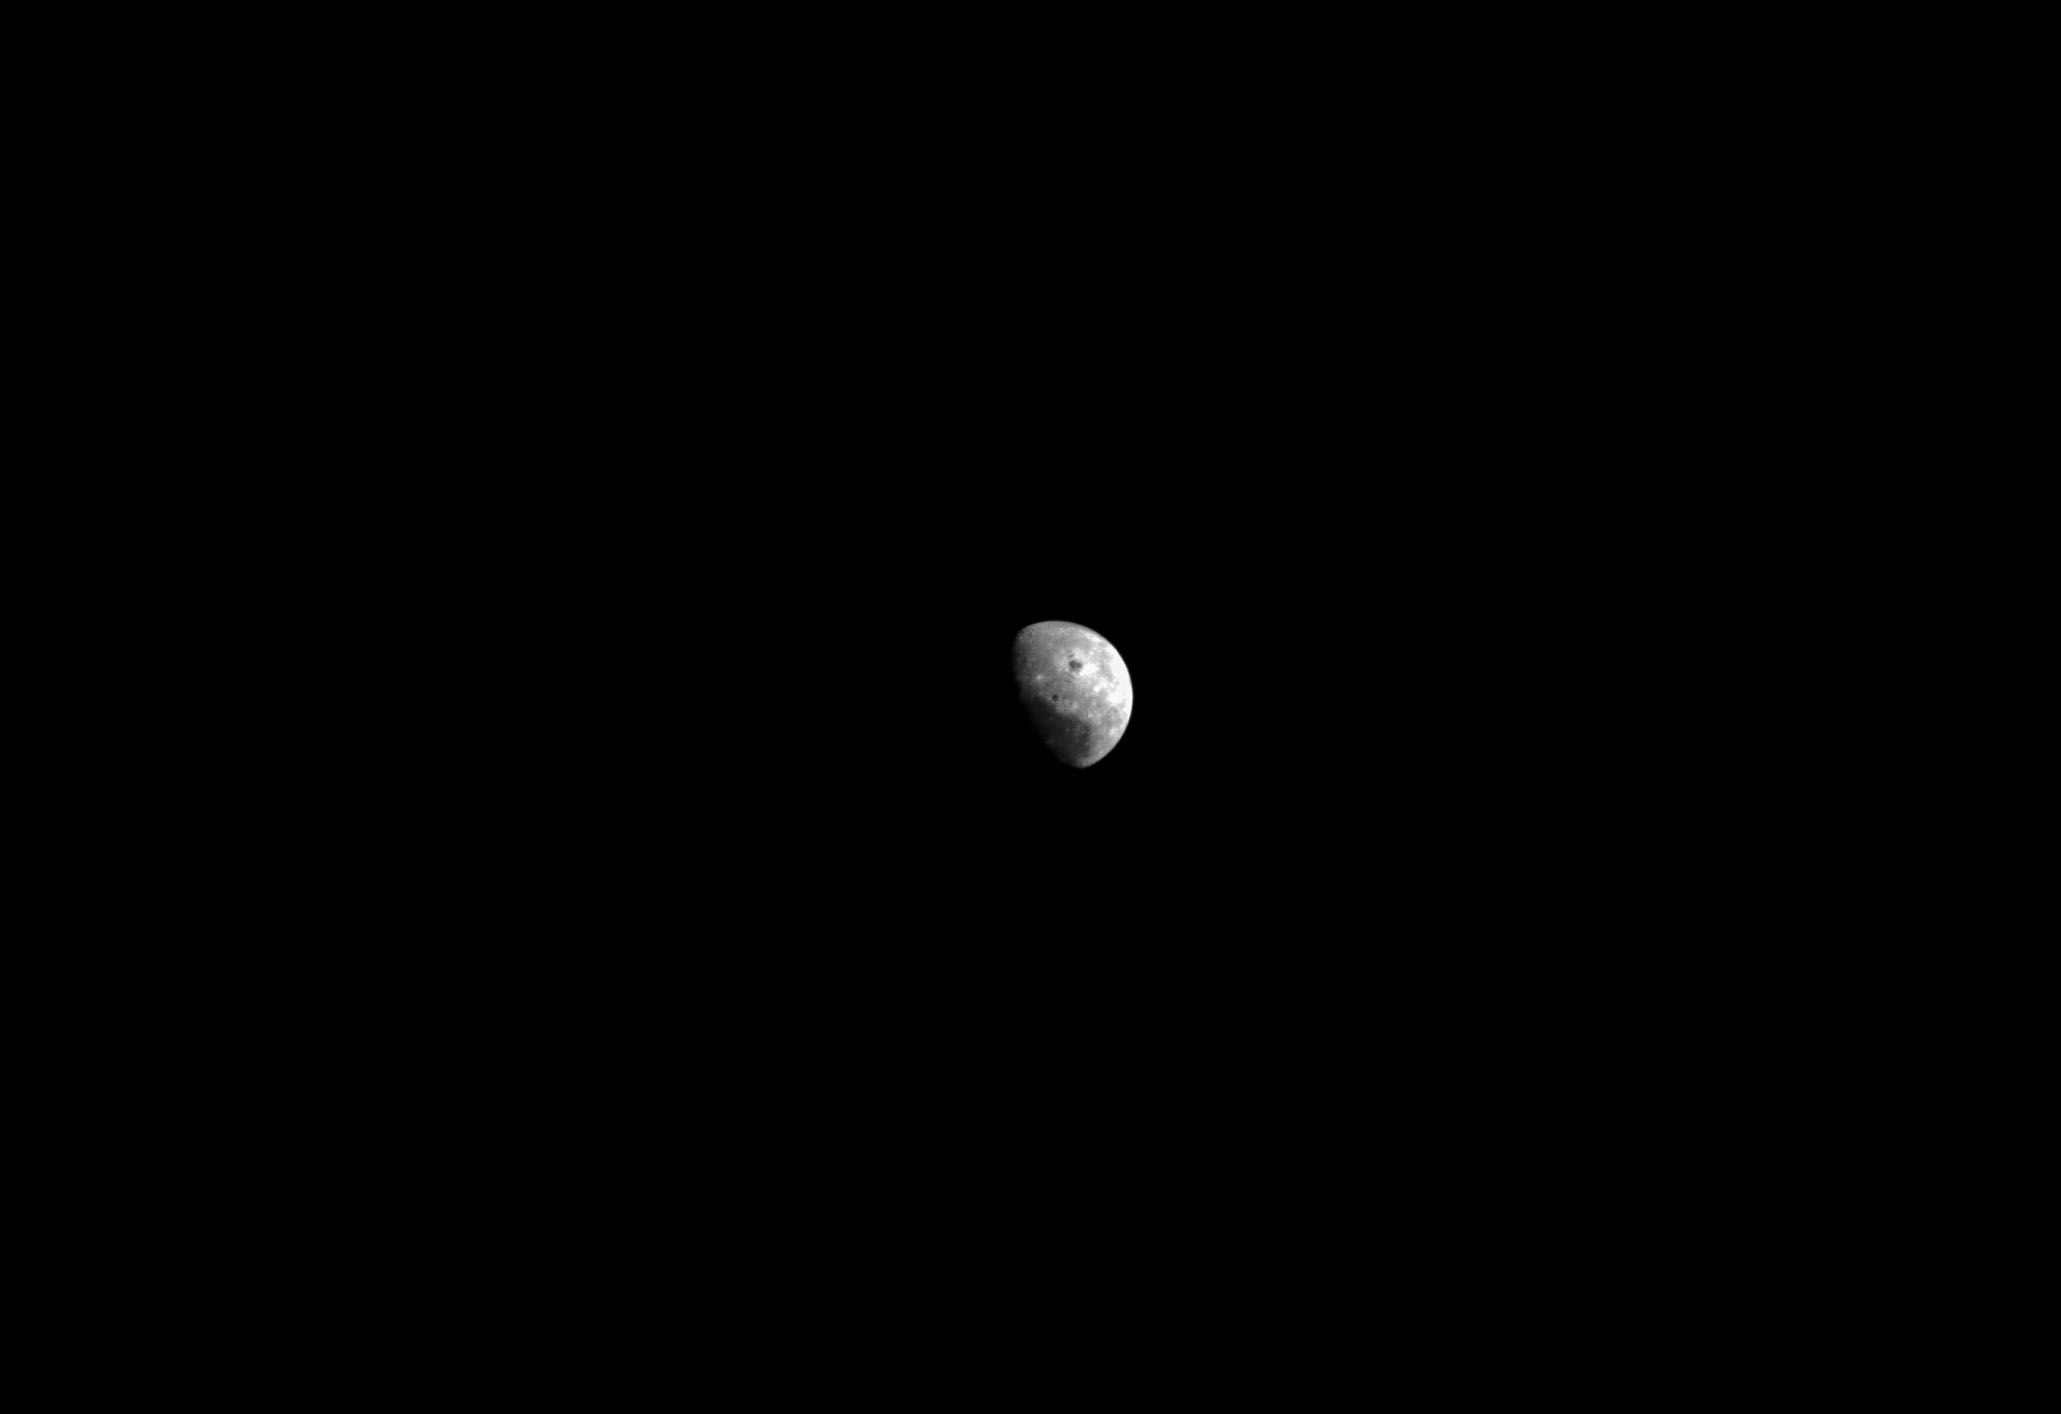 moon from far away as photographed by orion spacecraft